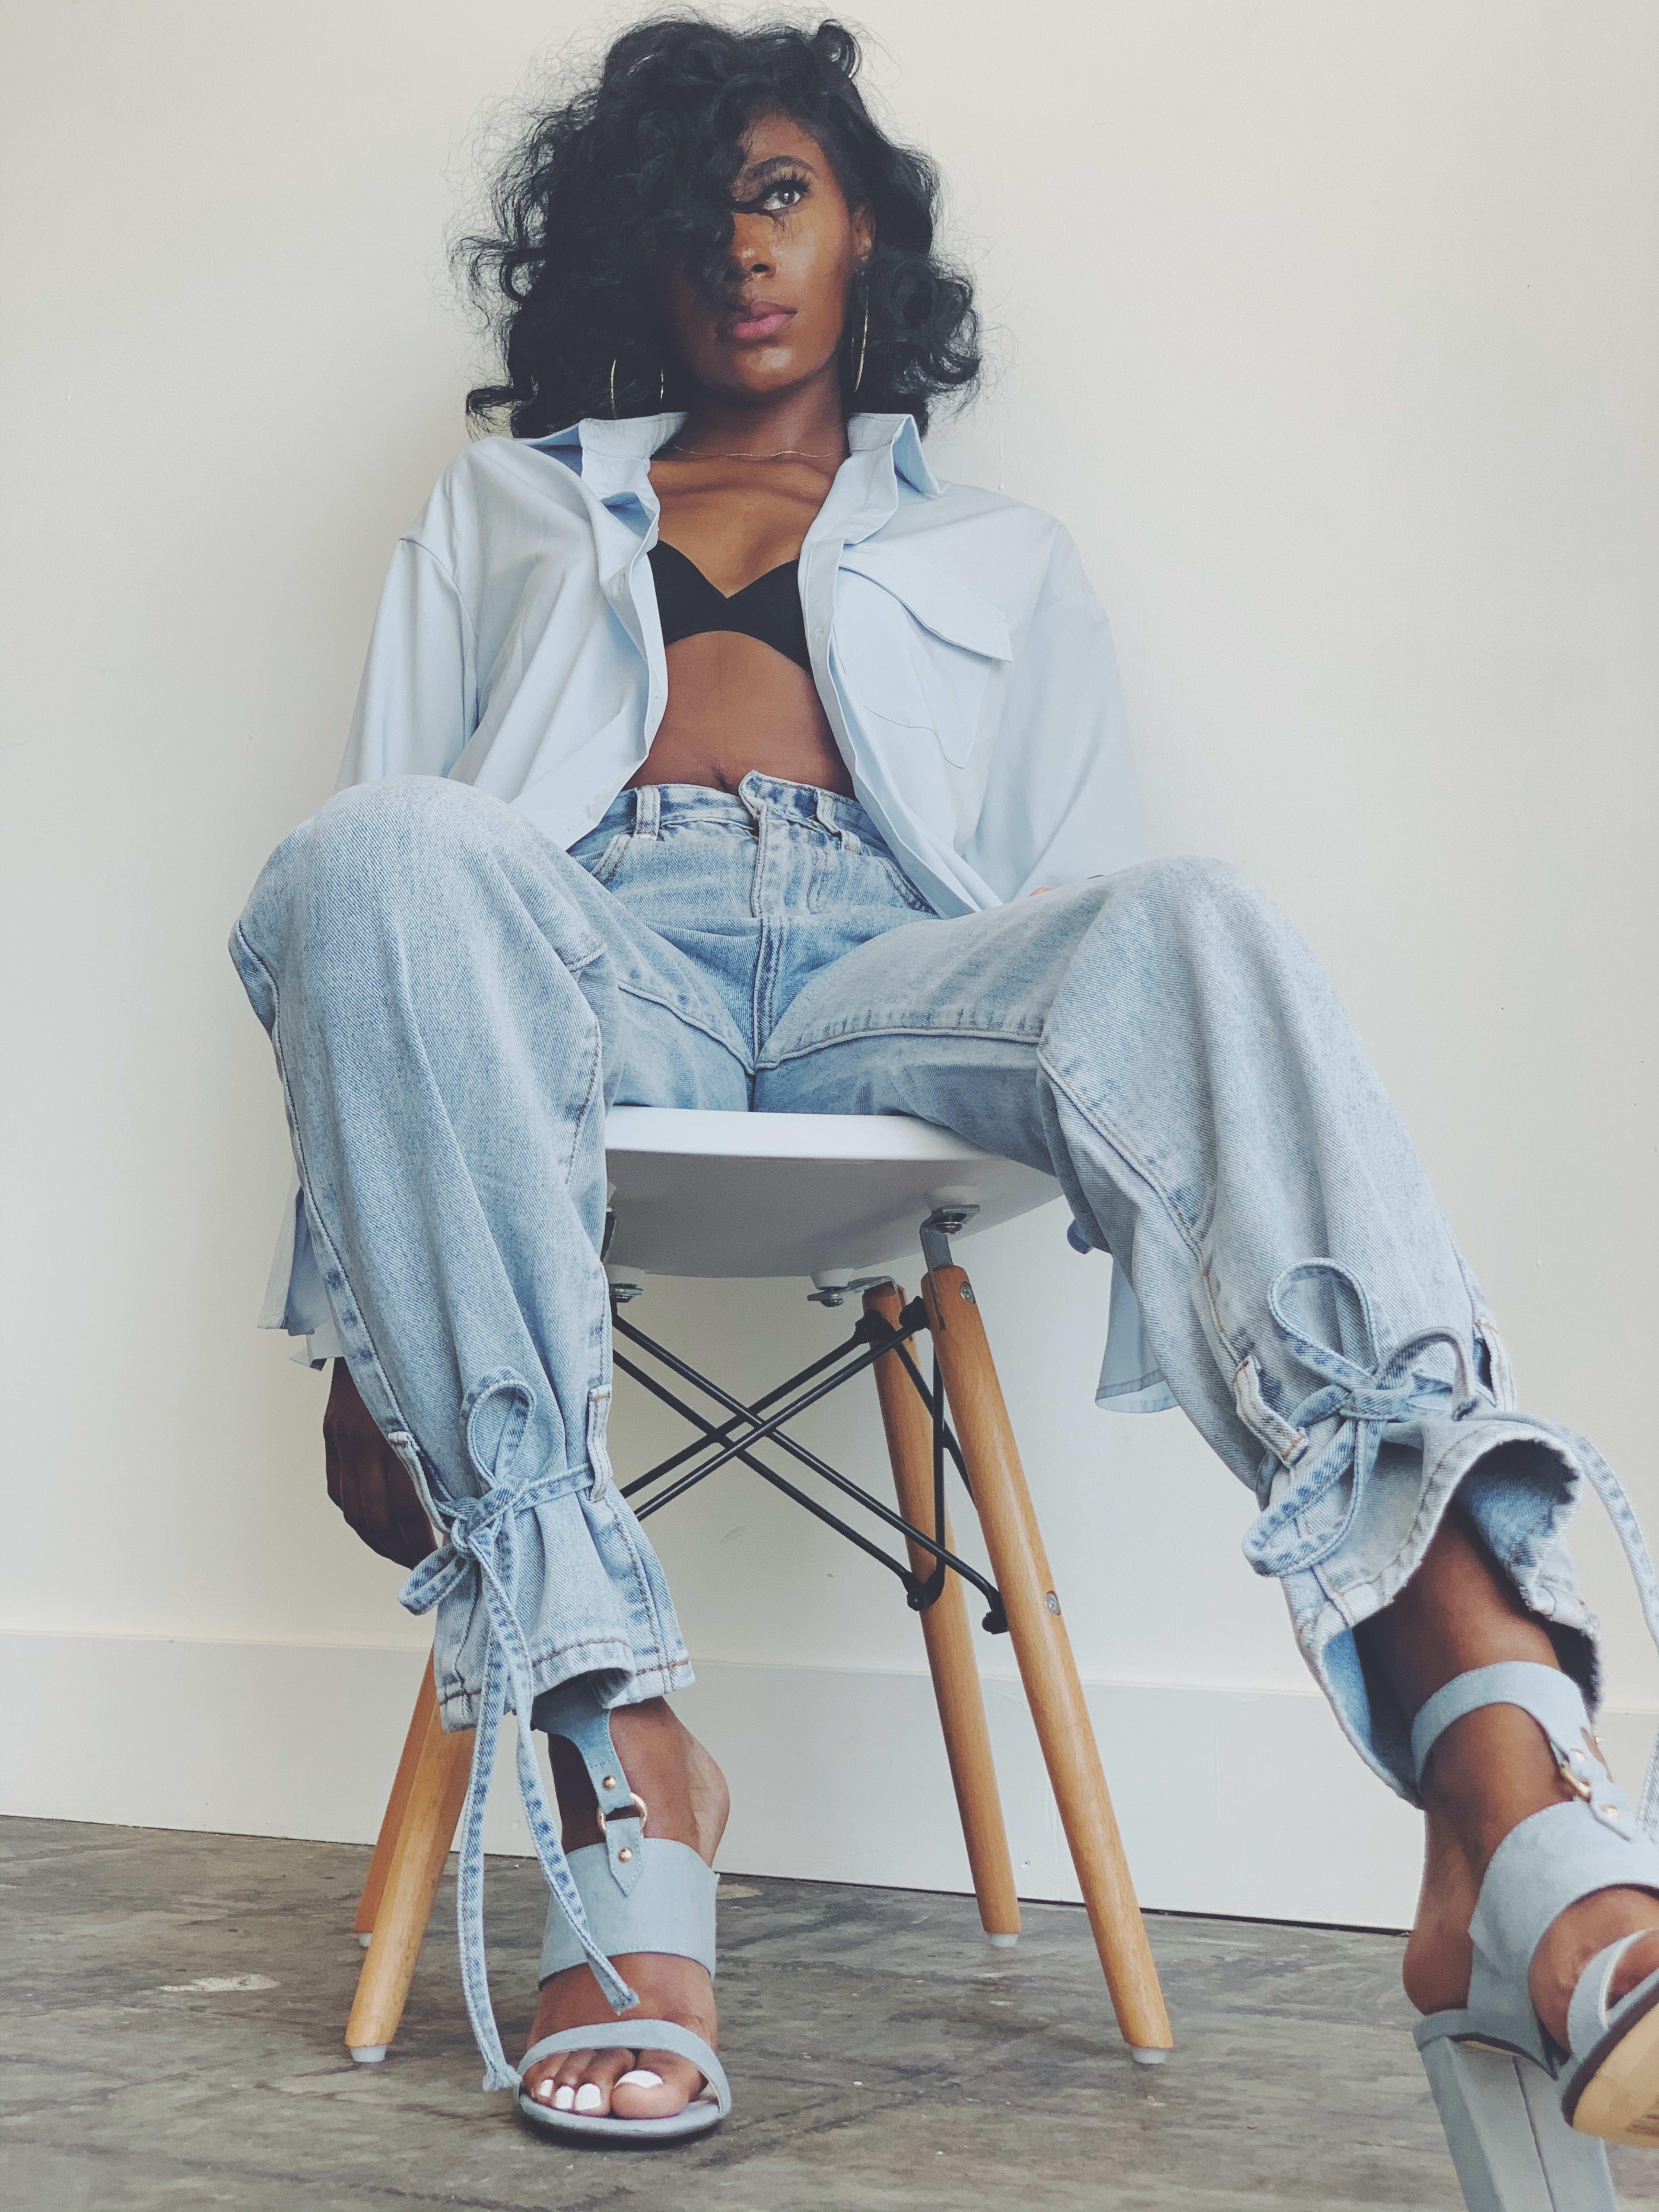 A woman in jeans and a baby blue button up posing on a white chair during a 1990s themed photoshoot.